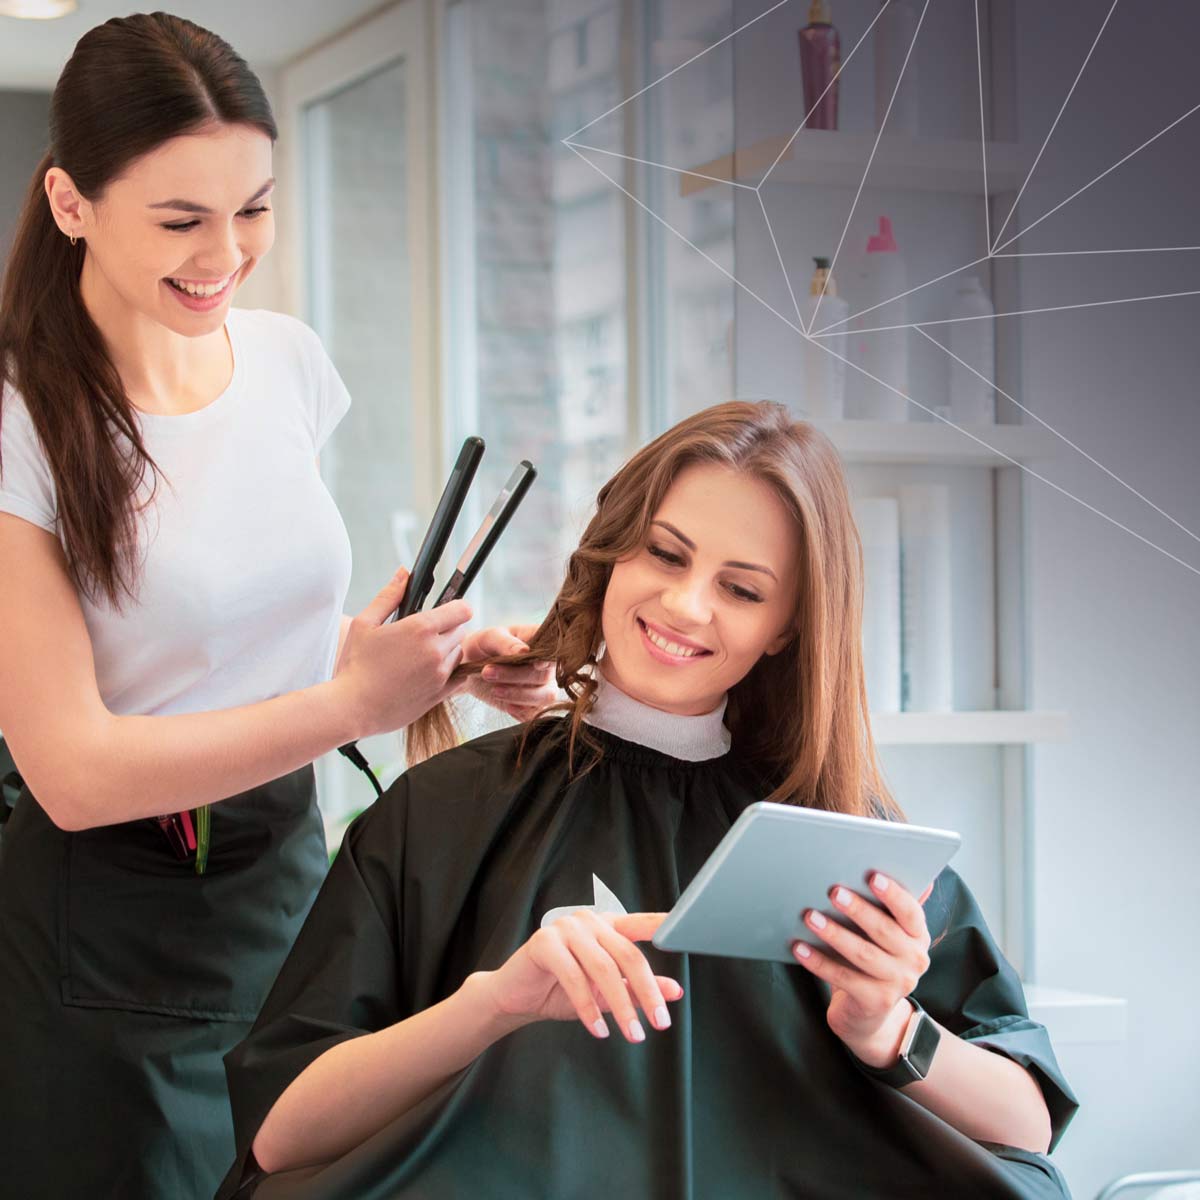 Earn More Money as a Cosmetologist